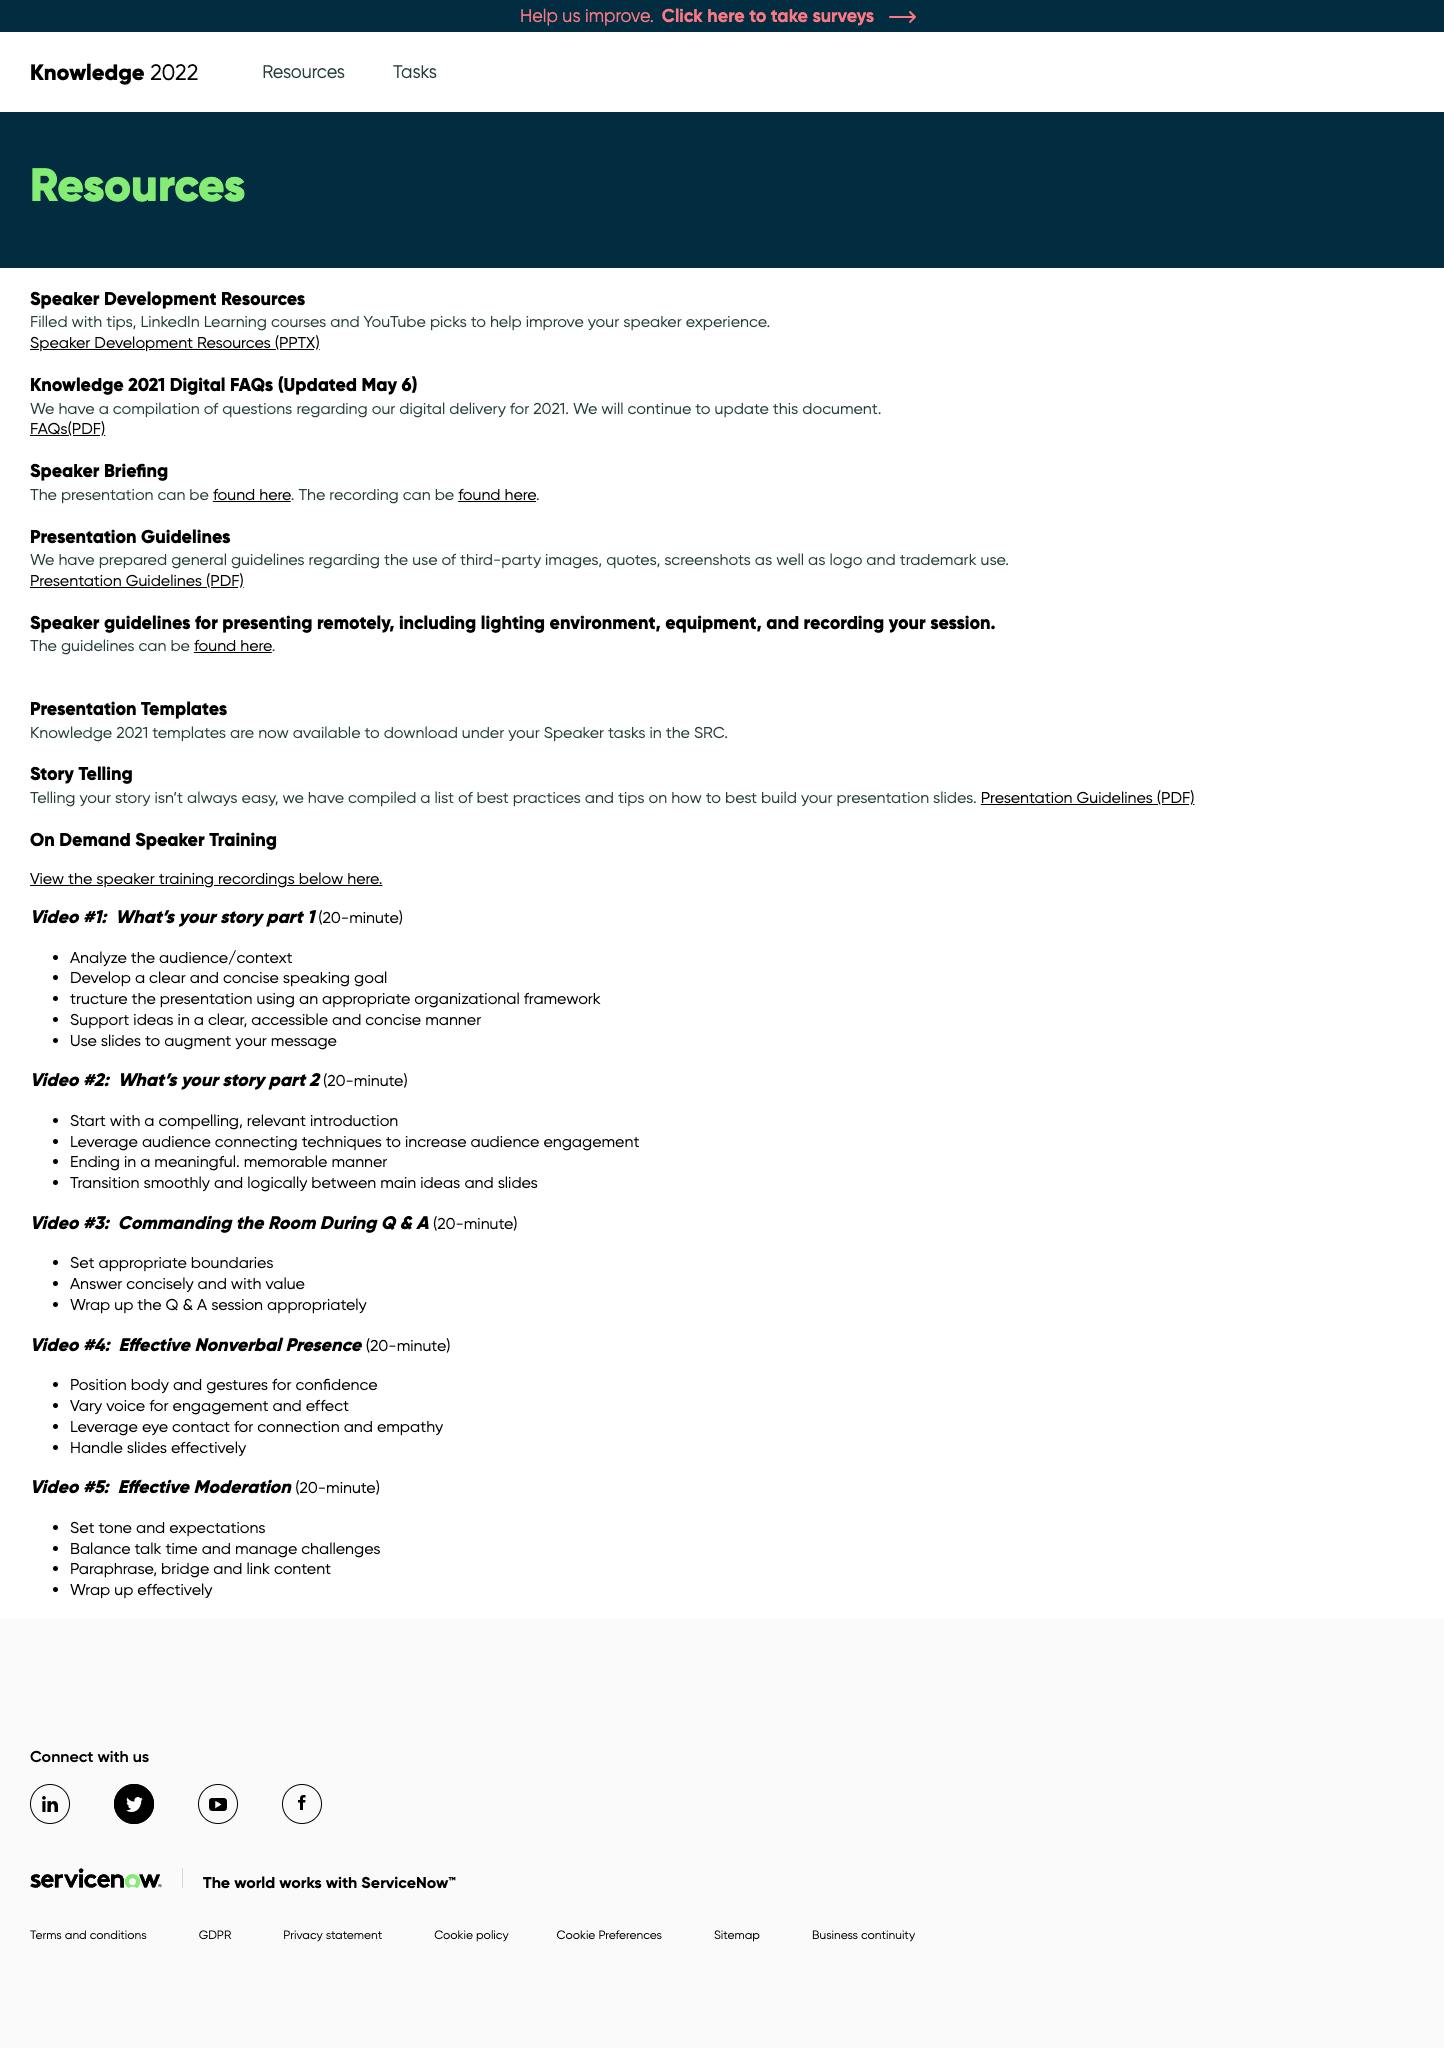 screencapture-events-servicenow-pages-servicenow-knowledge2022-resources-2022-01-20-16_16_26 (2).png